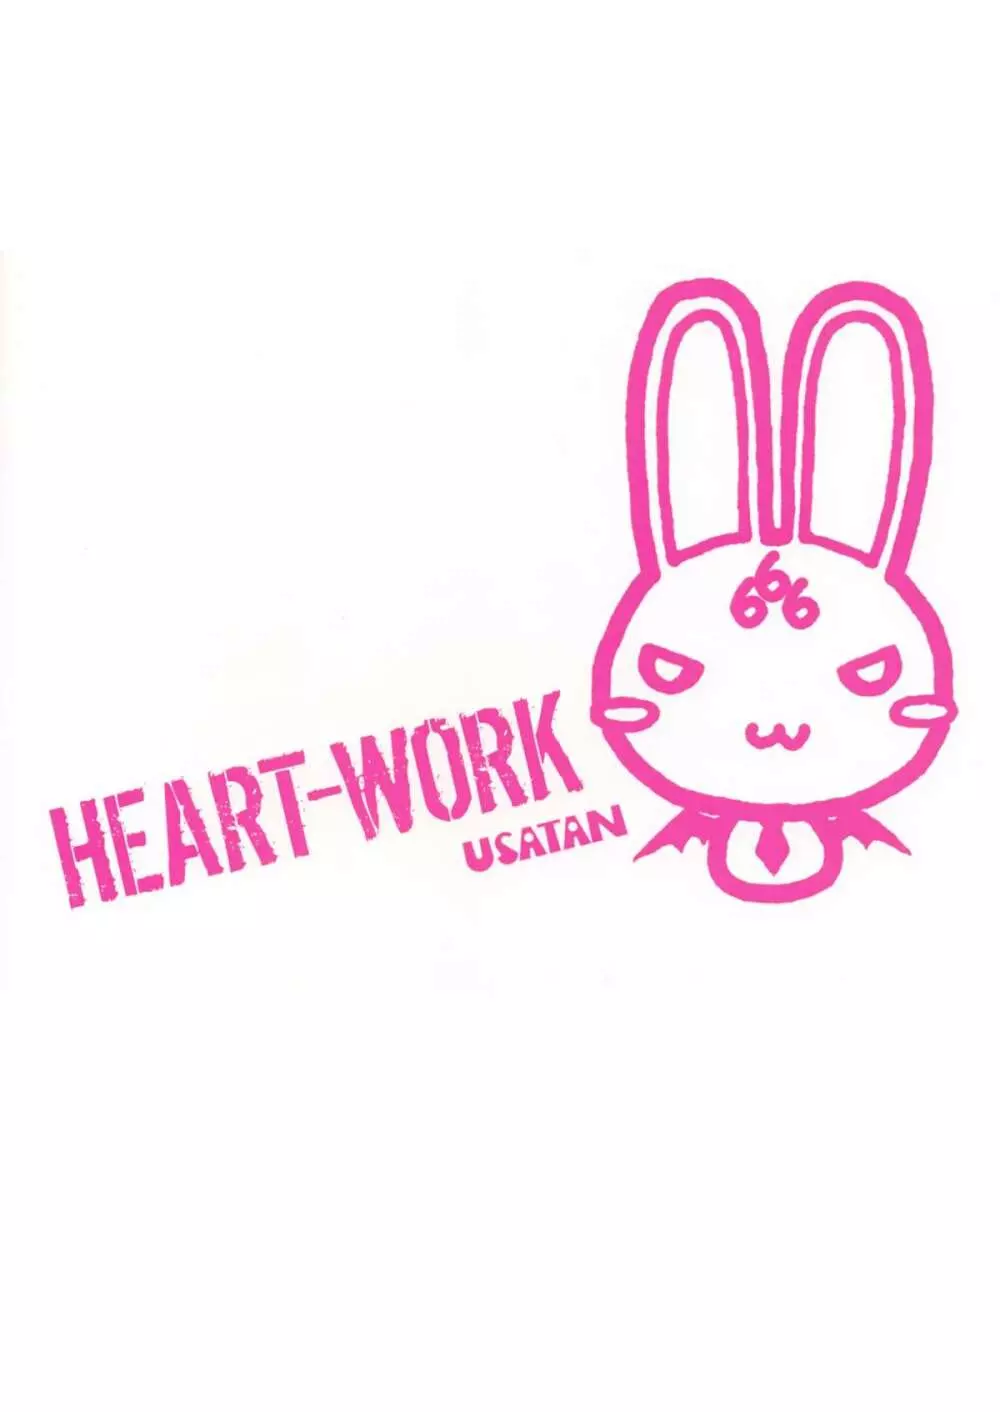 (C83) [HEART WORK (鈴平ひろ)] Waiting for you – HEART-WORK 2012.12.29 (よろず) 9ページ